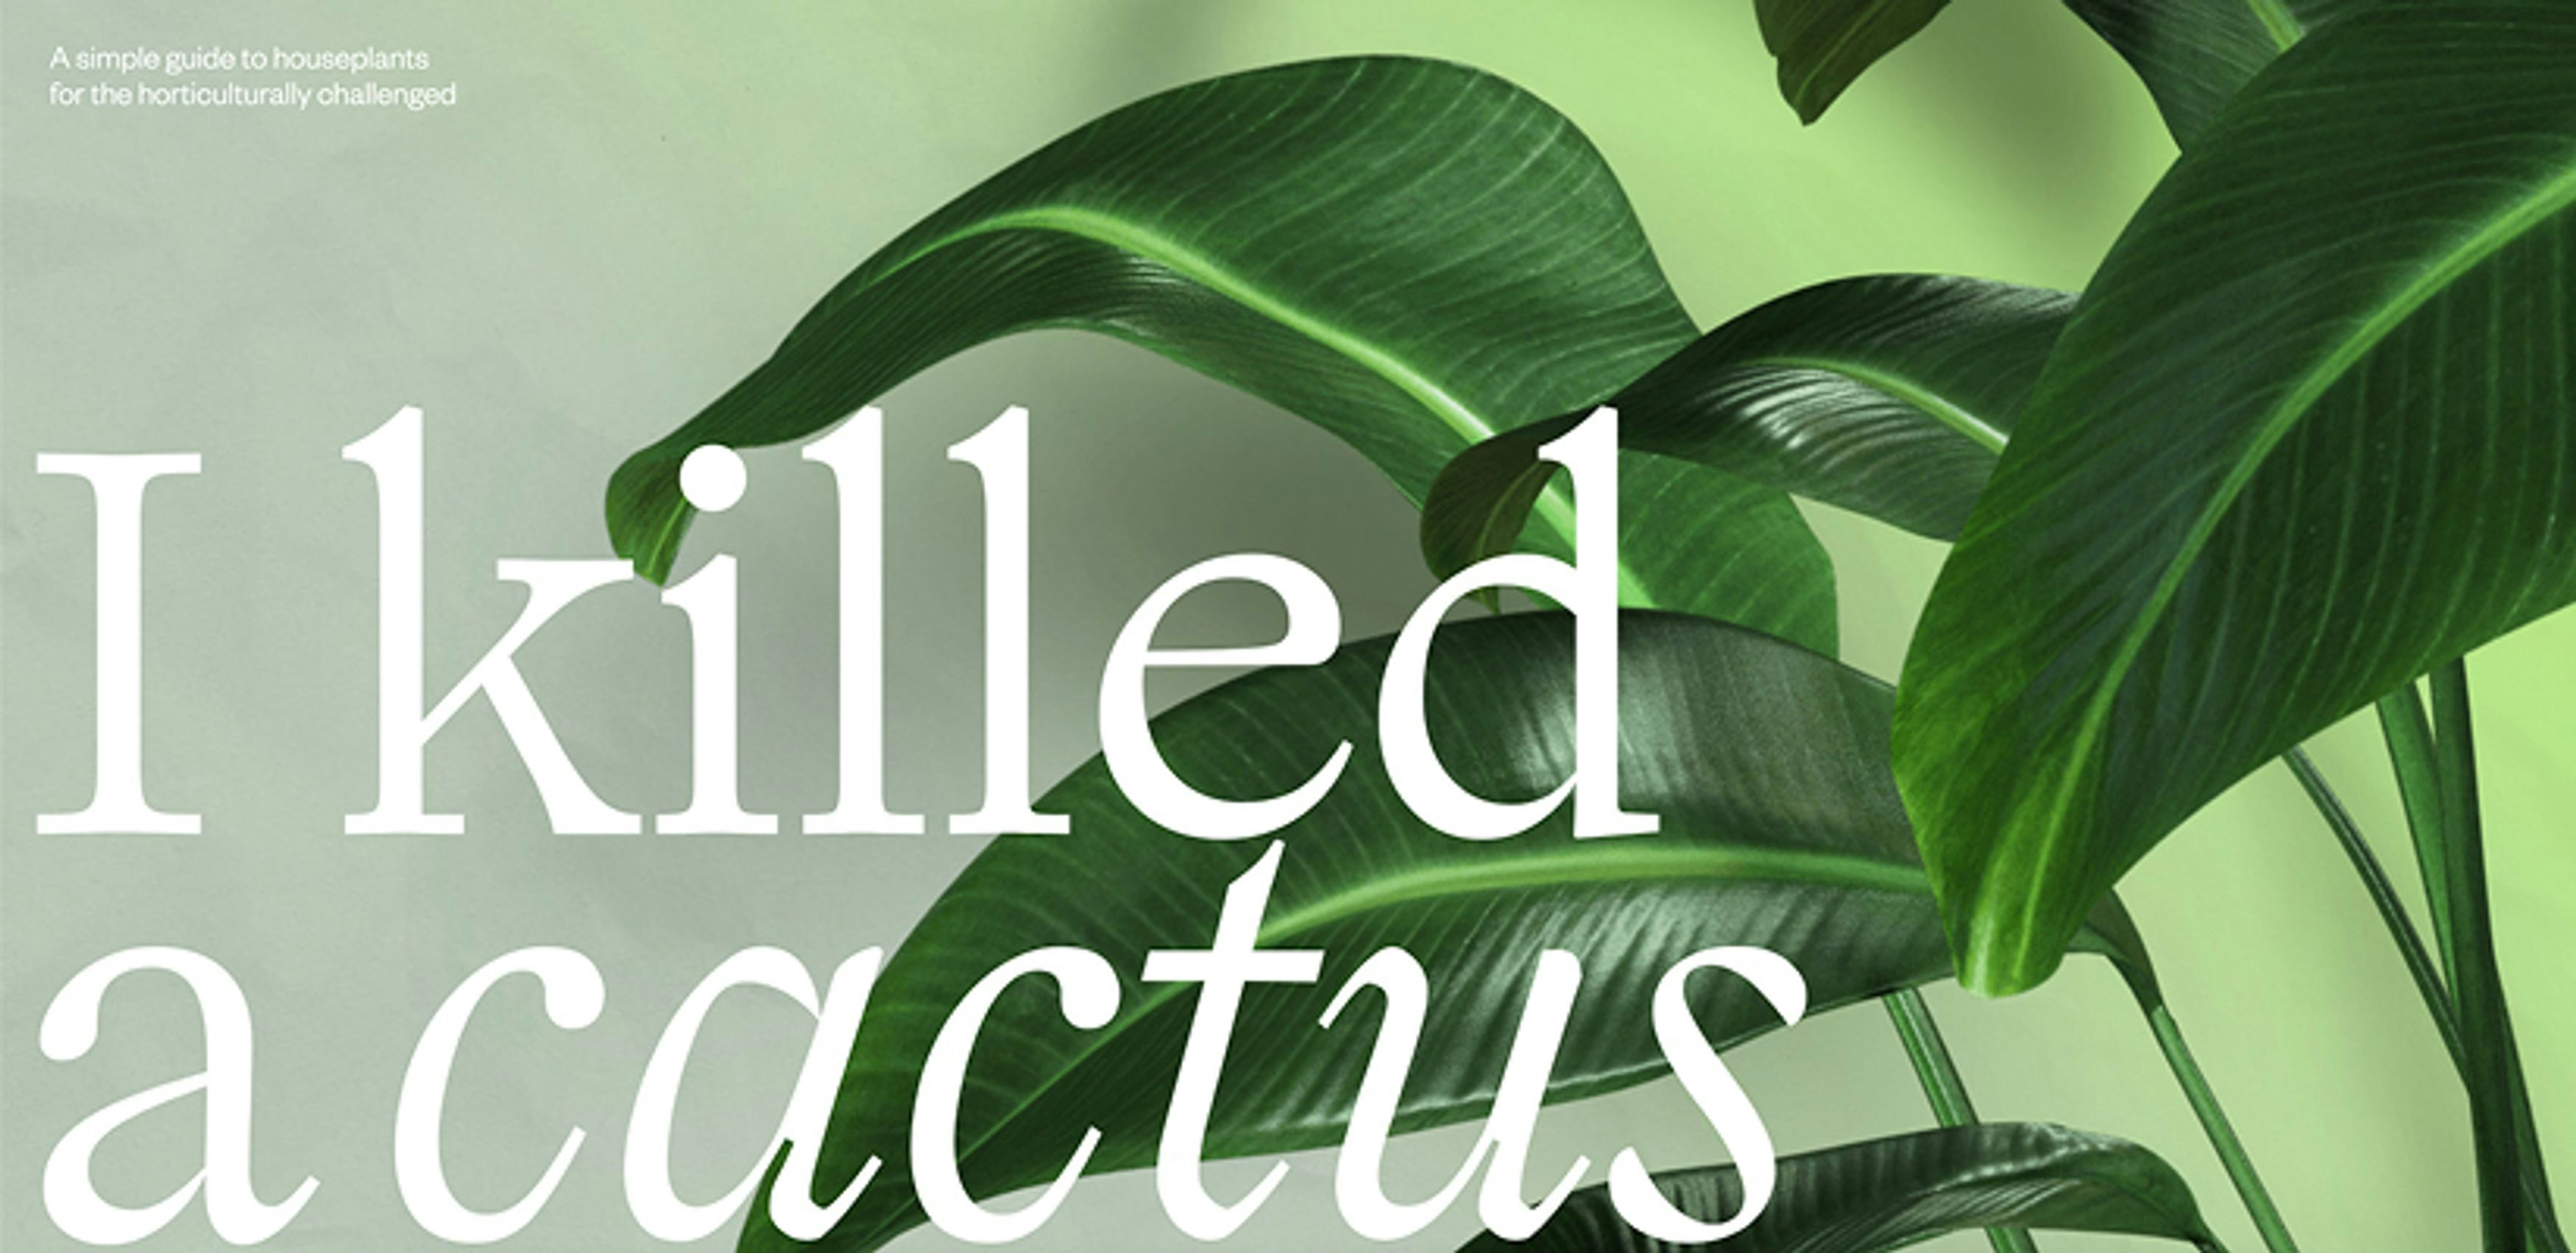 Graphic banner with a close-up of vibrant green houseplant leaves, featuring the humorous text 'I killed a cactus' in large, bold font.